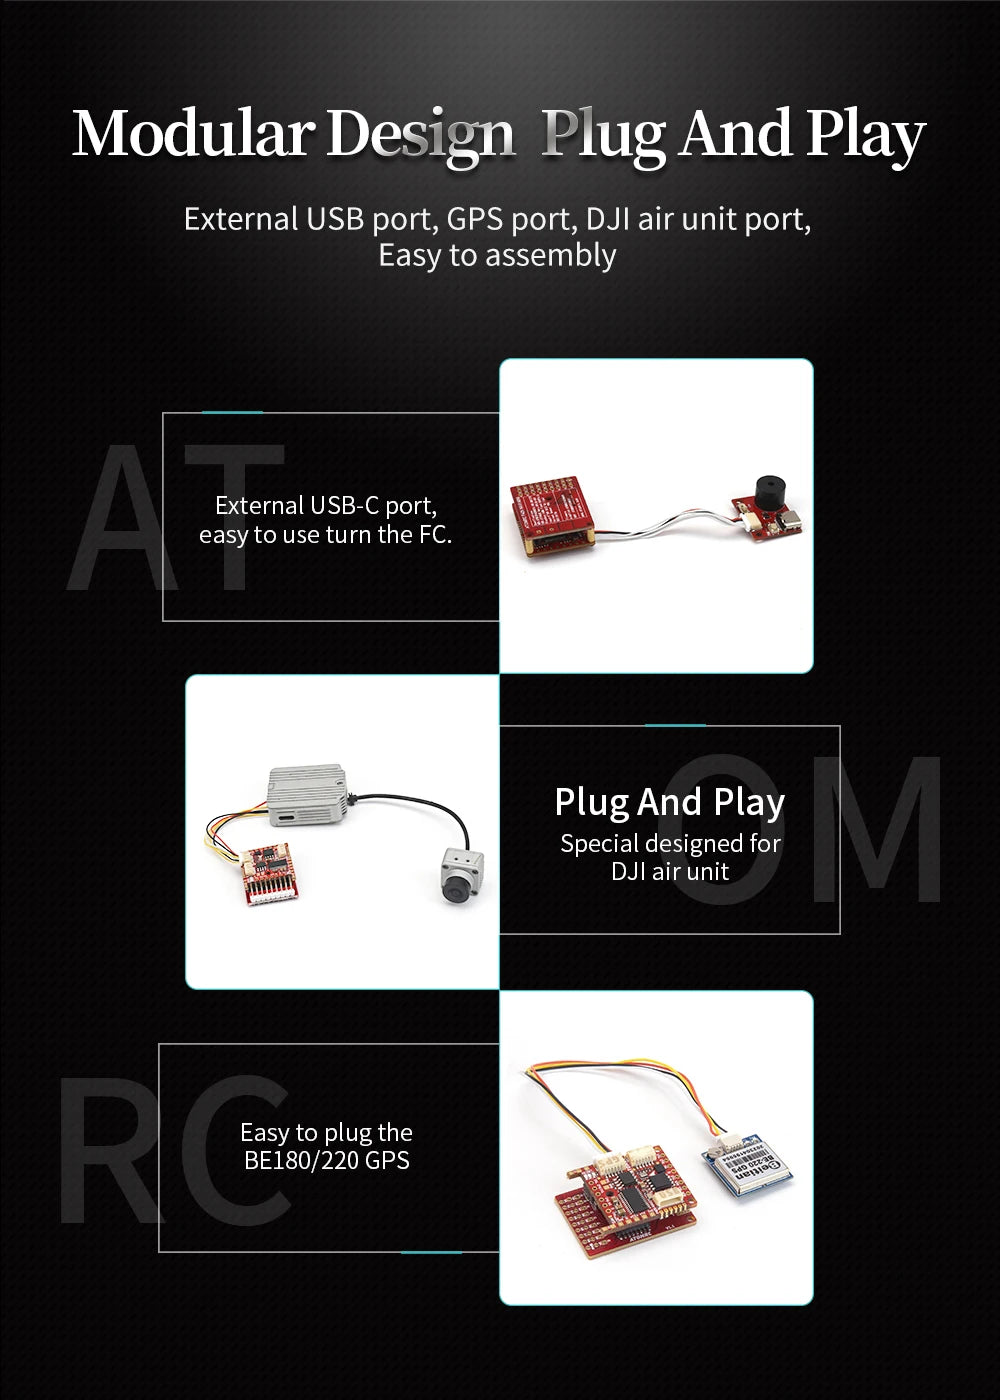 PlugAnd Special designed for DJi air unit Easy to plug the Rl BE180/220